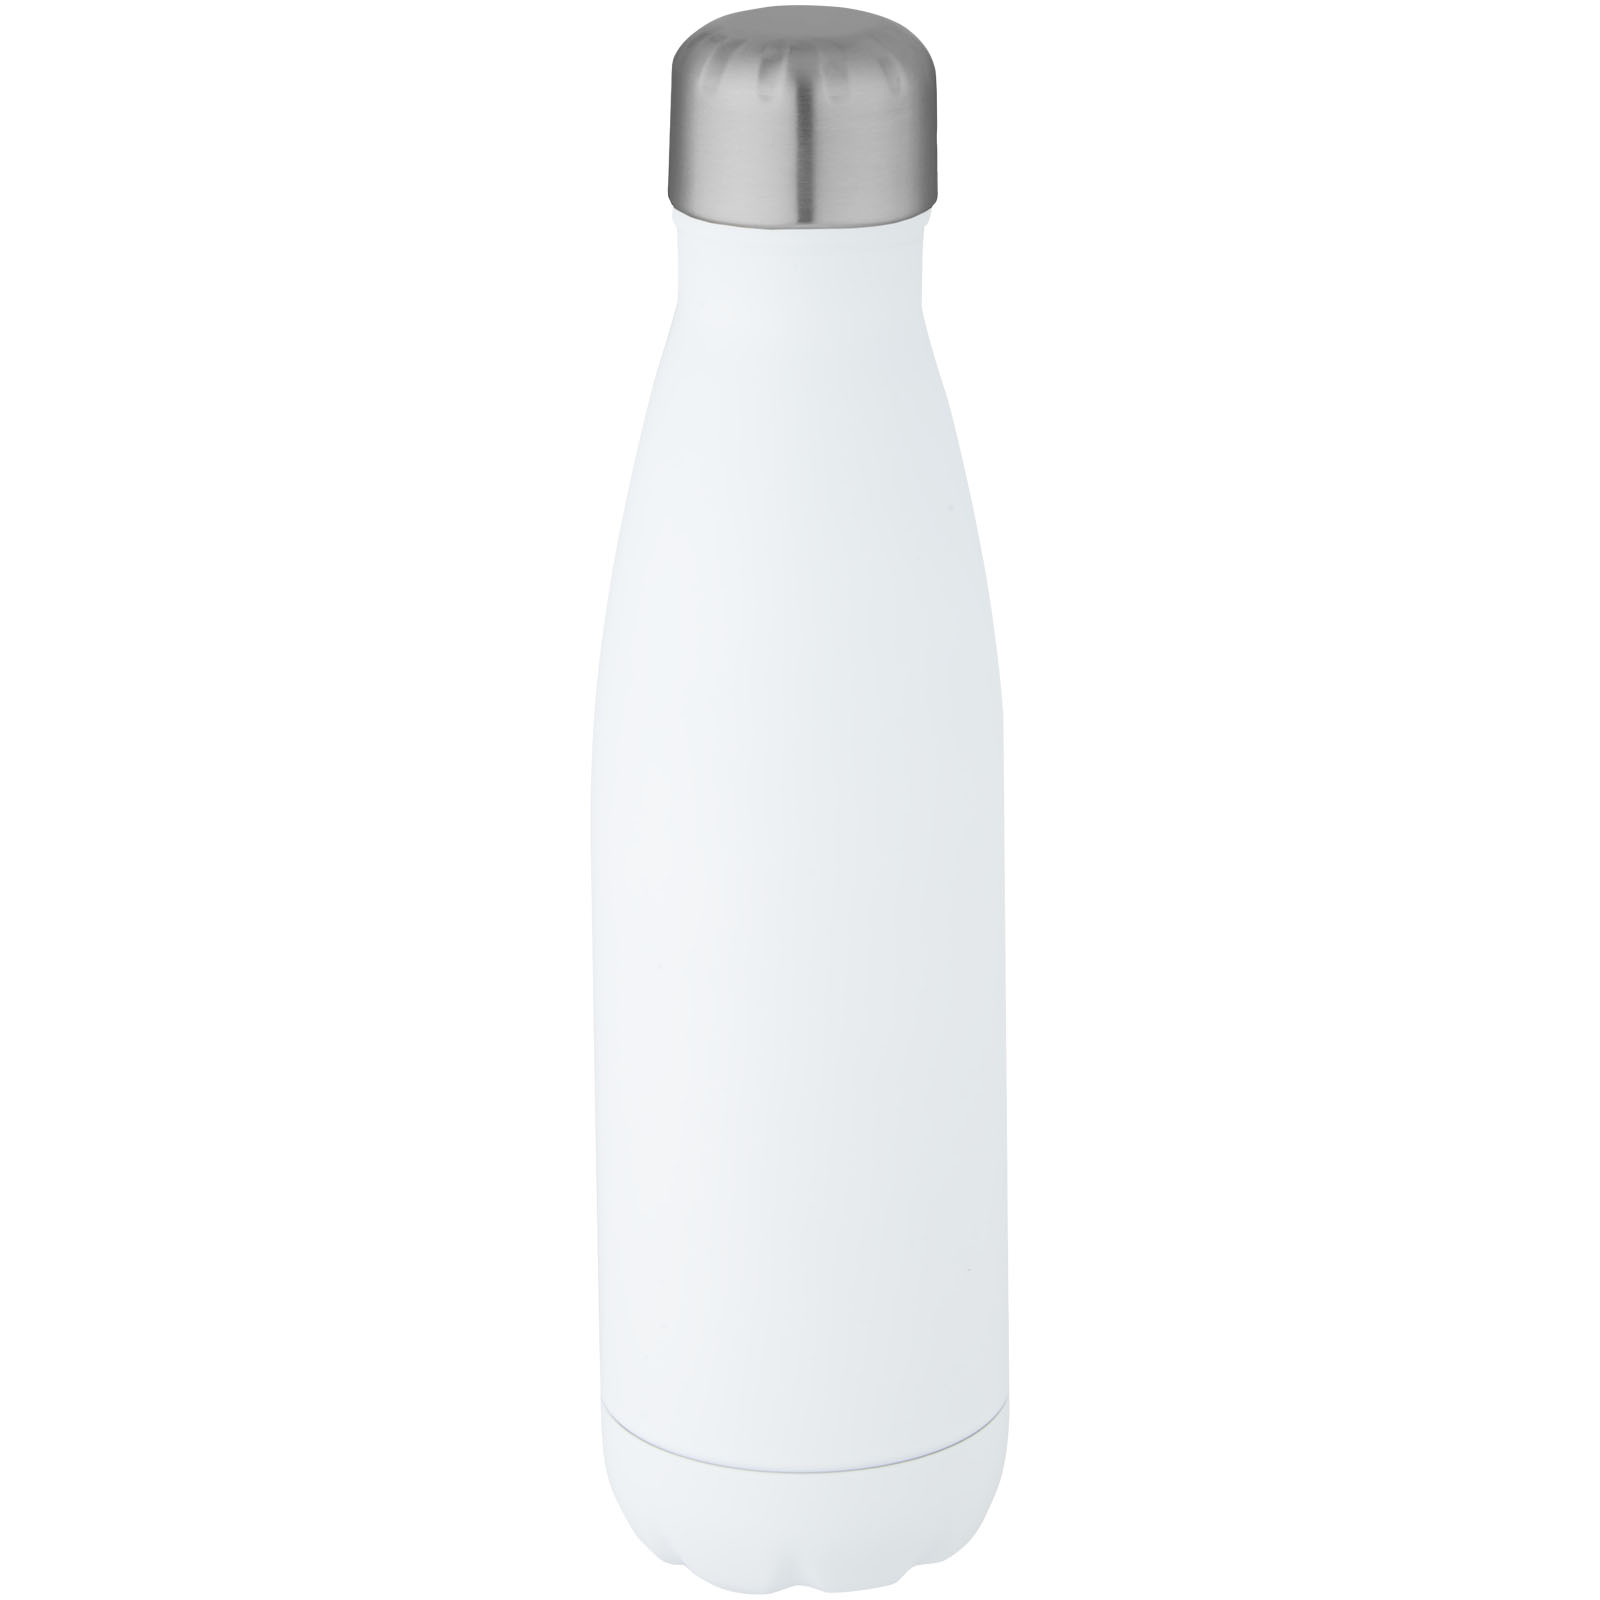 Insulated bottles - Cove 500 ml vacuum insulated stainless steel bottle